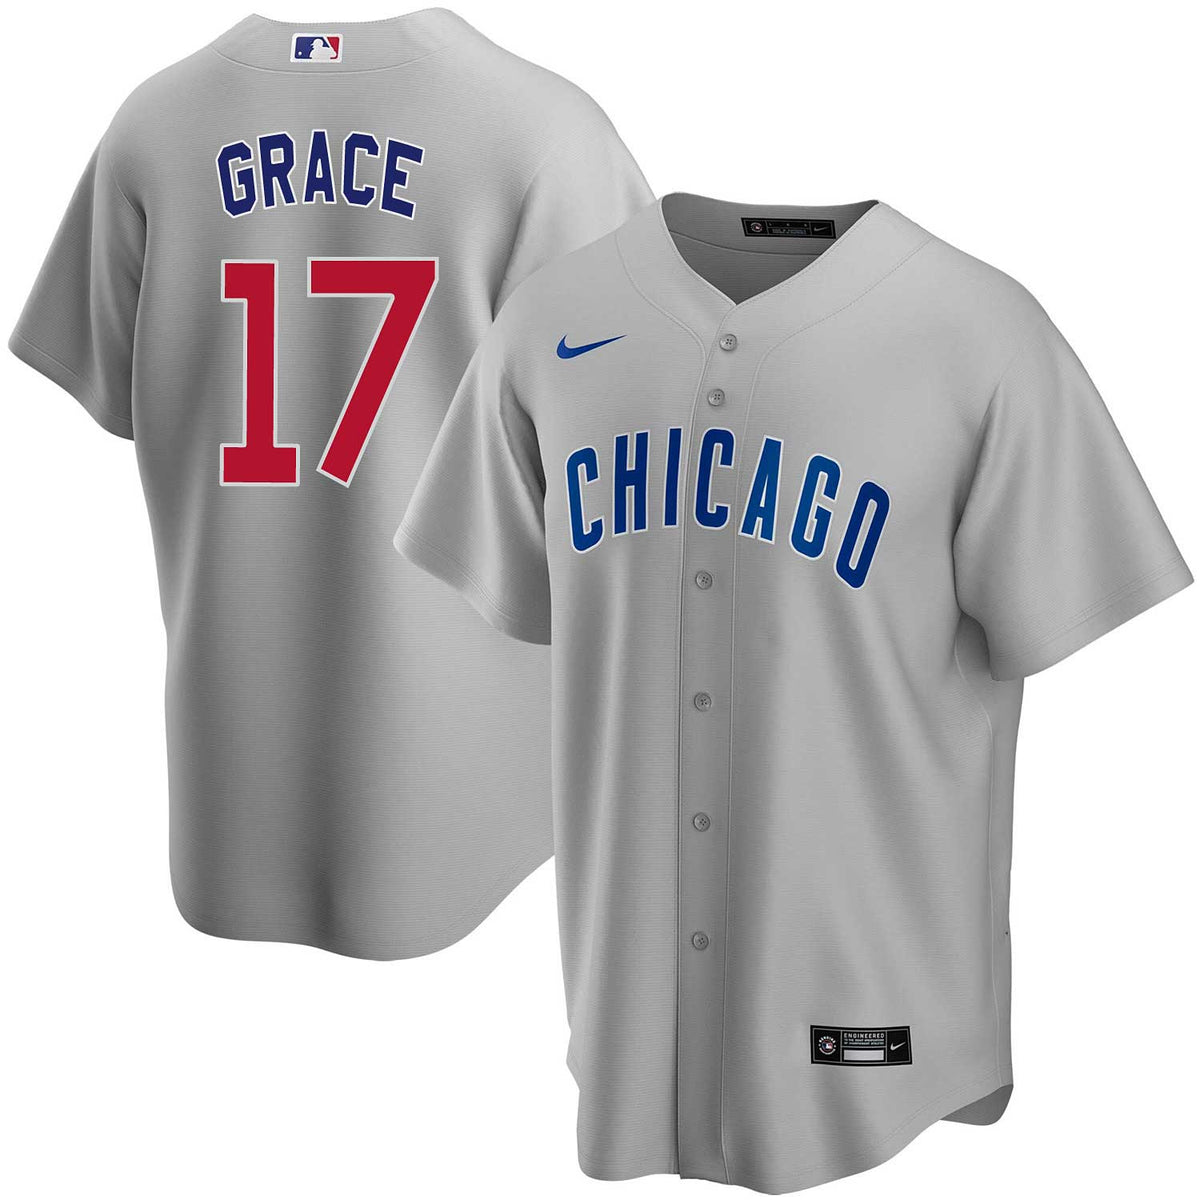 Hey Cubs! Make This Great-Looking Jersey Your Primary Road